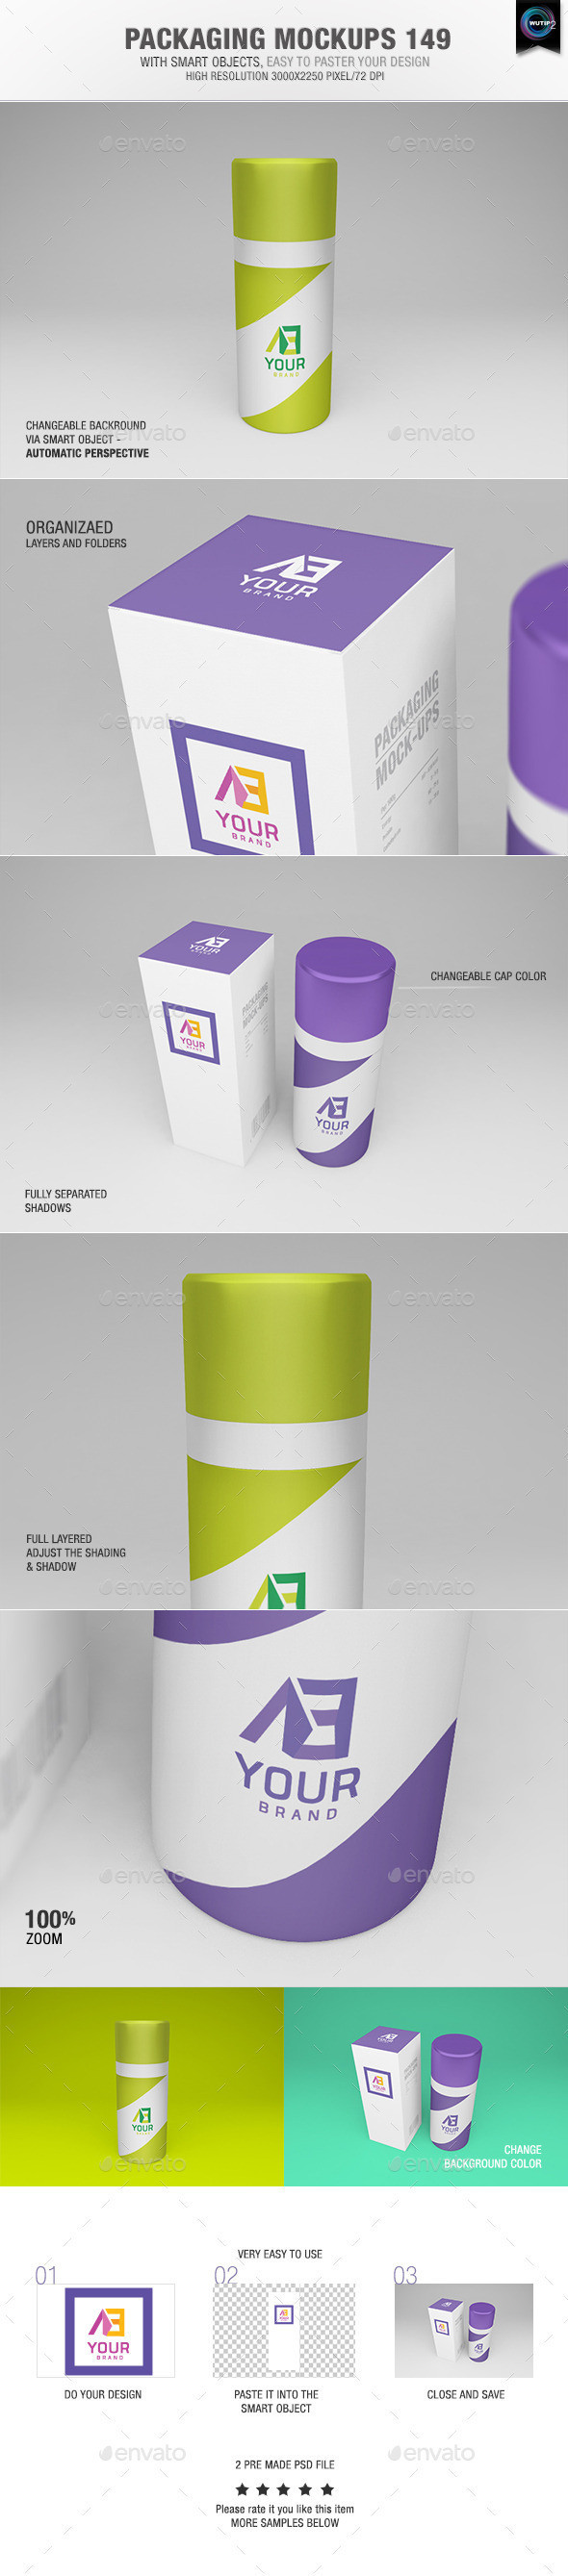 Packaging 20mockups 20149 20preview